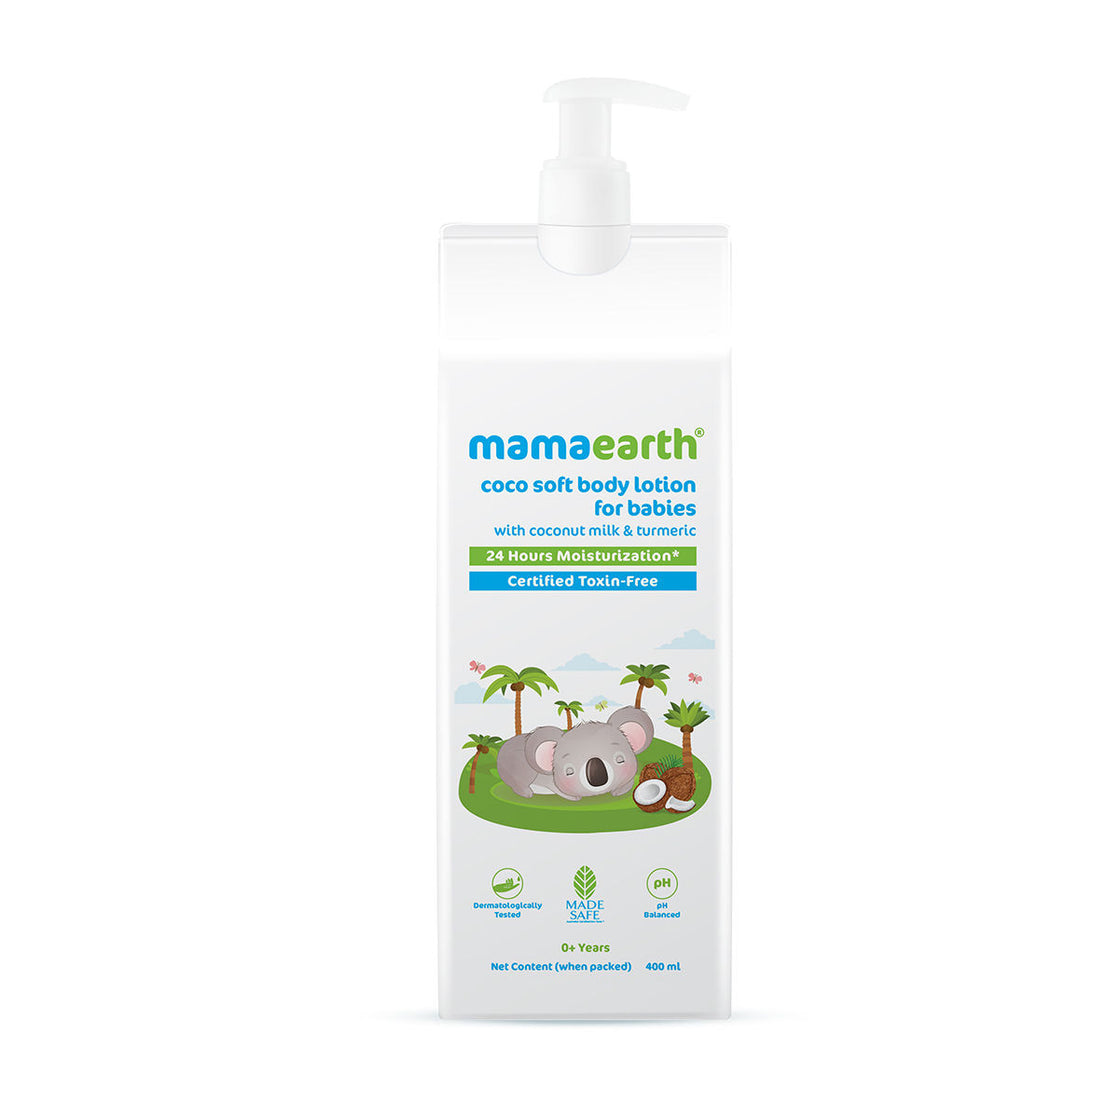 Mamaearth Coco Soft Body Lotion With Coconut Milk & Turmeric For Babies